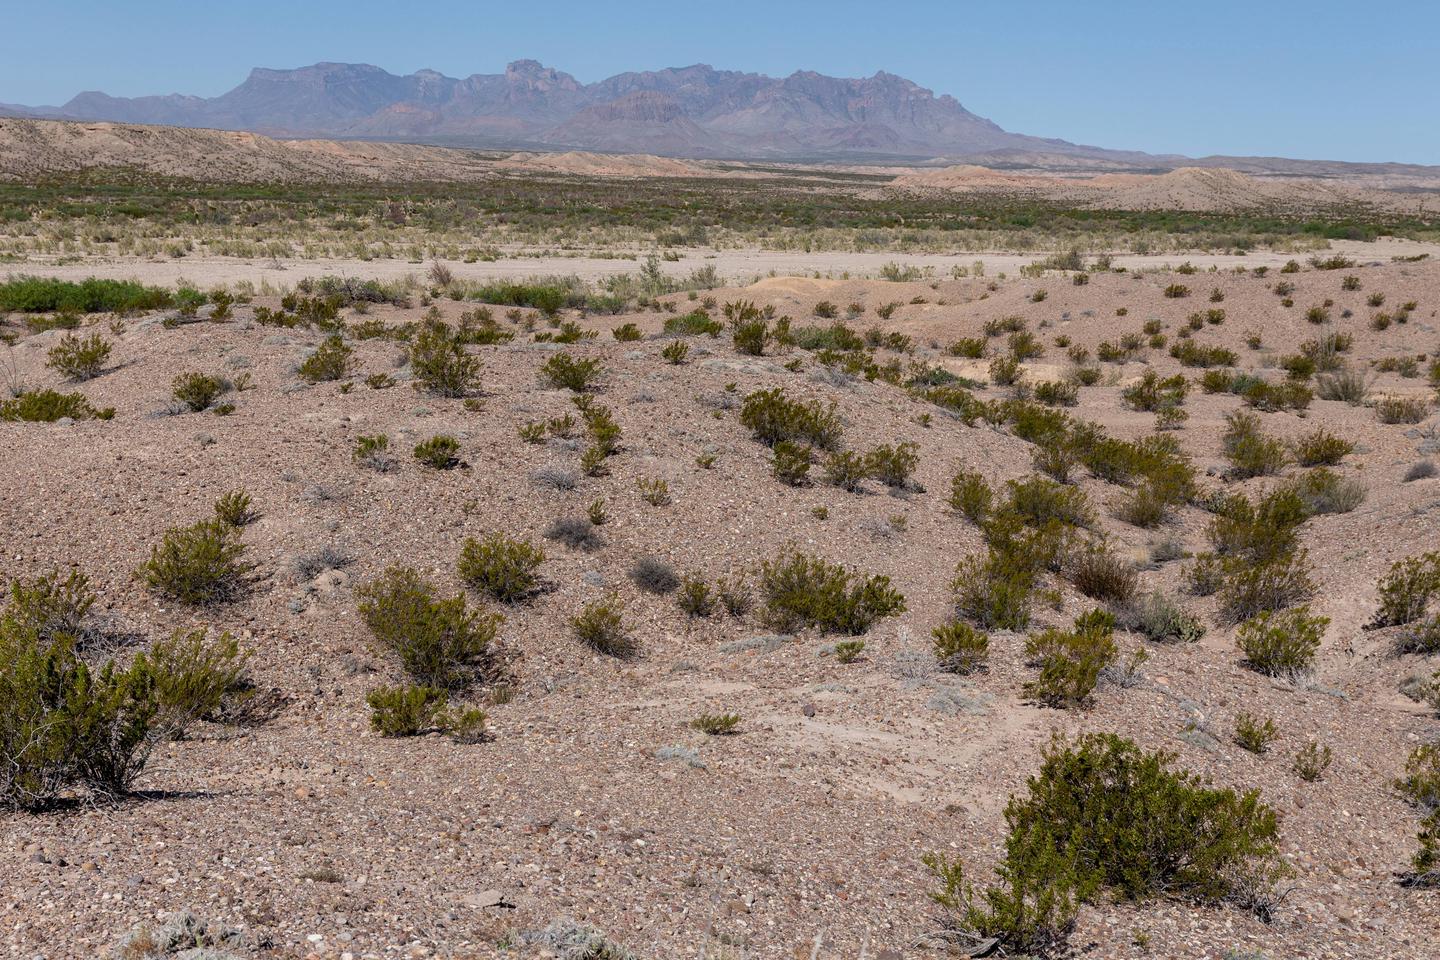 Desert plants with mountains in the distanceDesert views